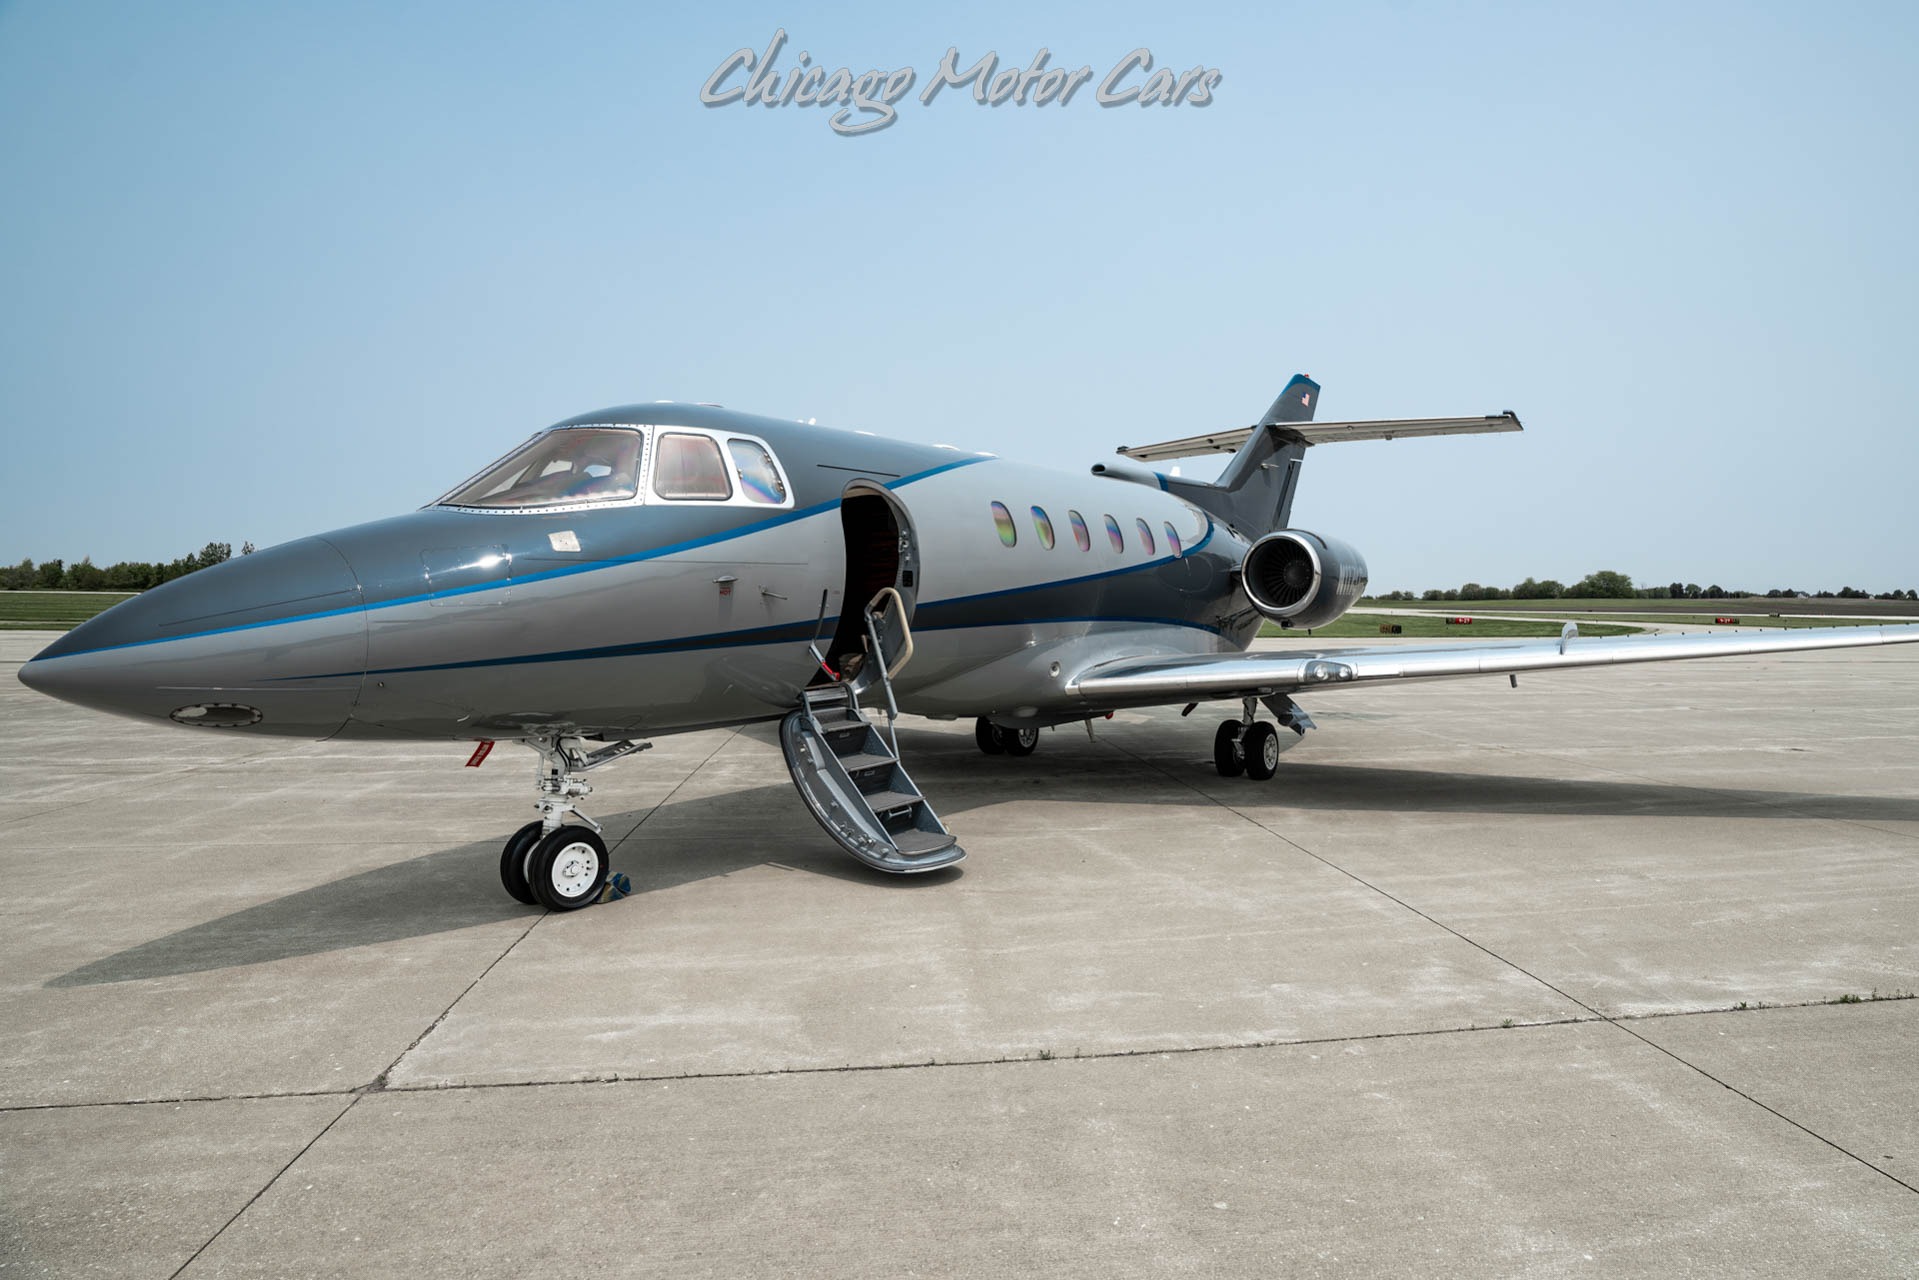 Used-1992-Hawker-800A-Low-Total-Time-Fresh-12--24--48--96-Month-Inspection-Completed